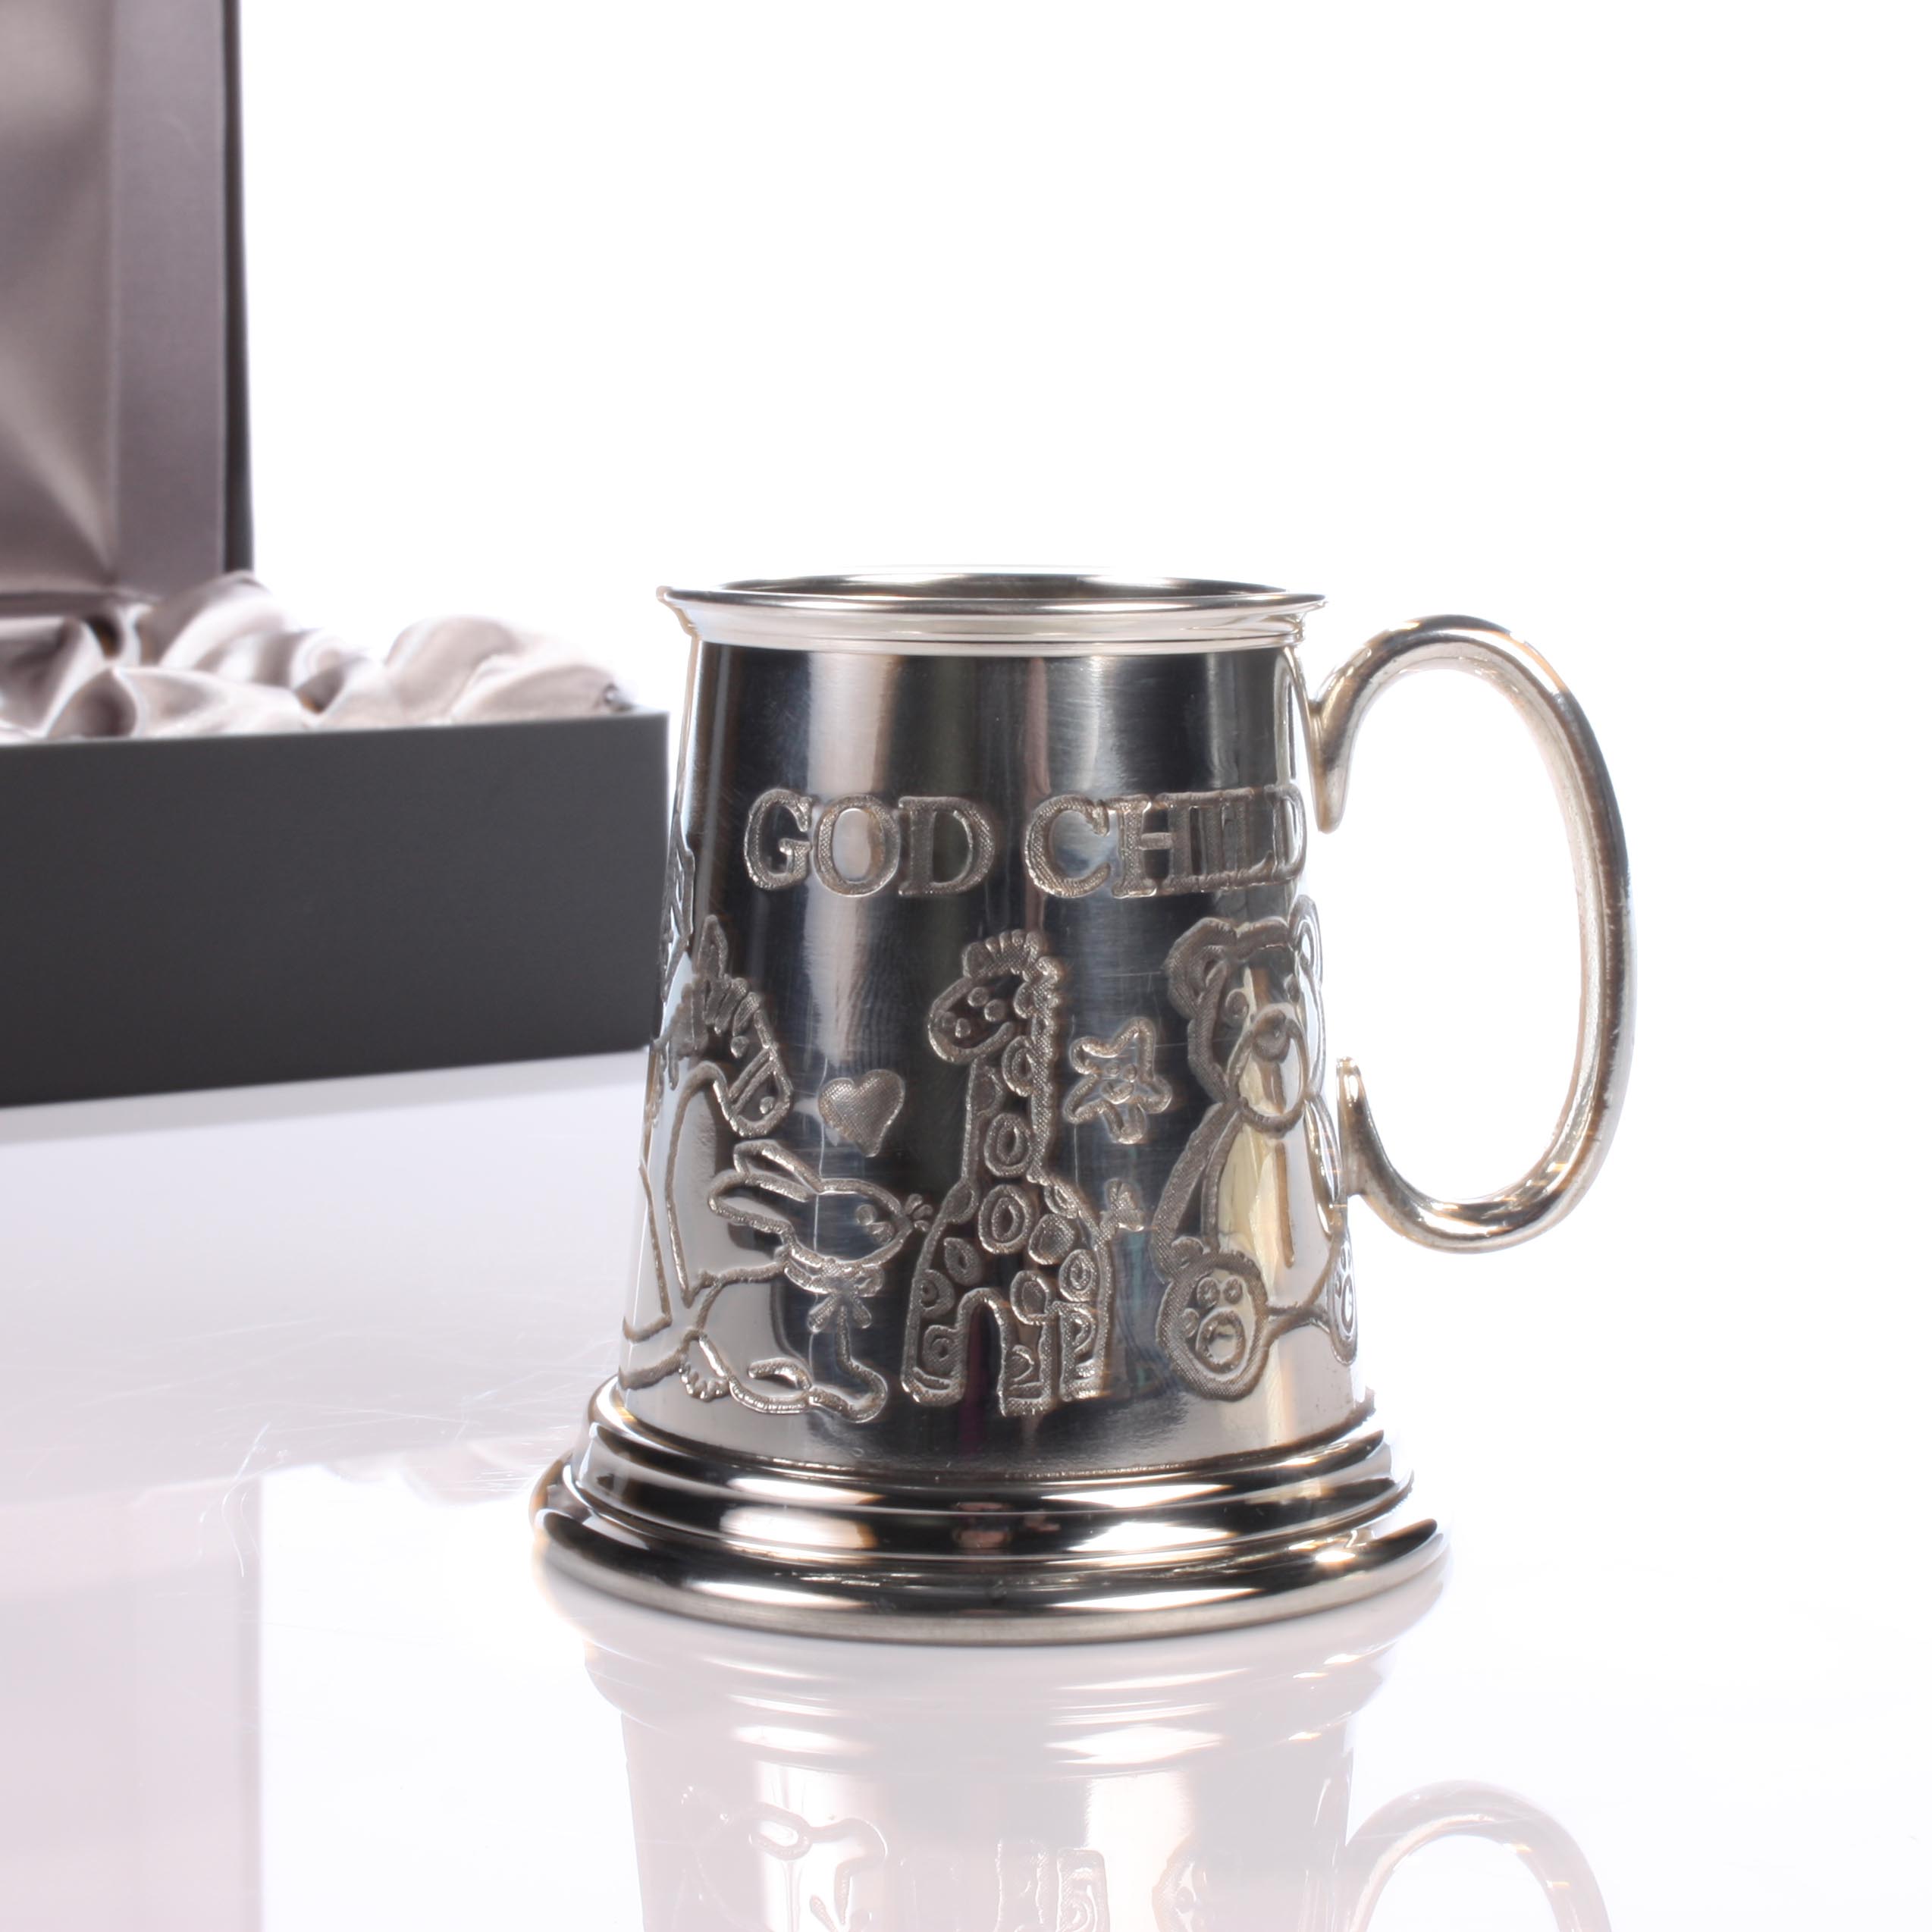 Unbranded Godchild Pewter Cup